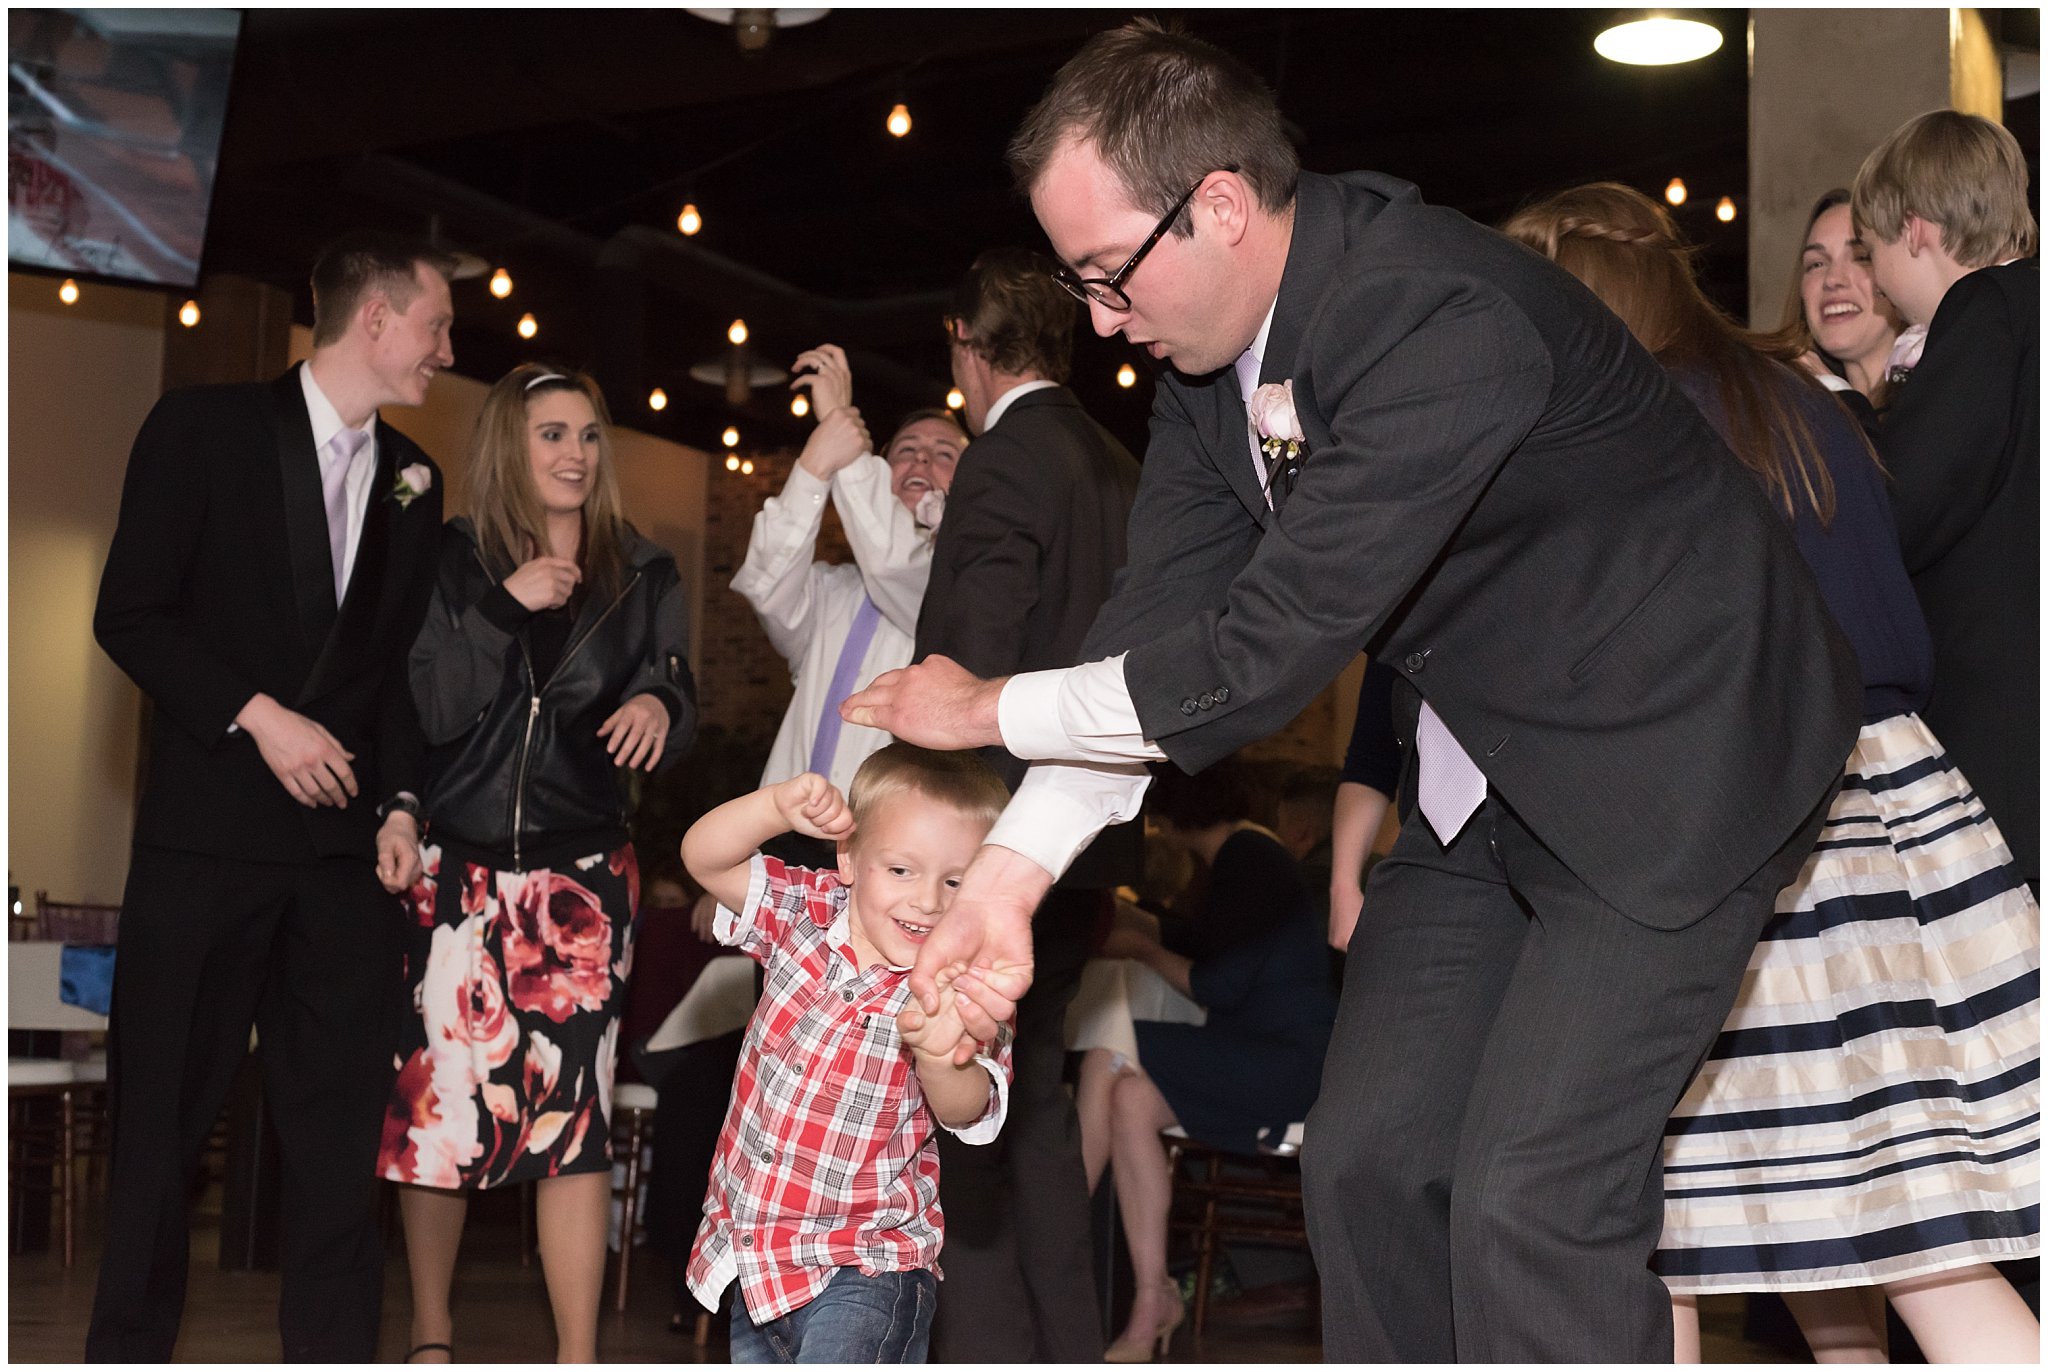 Wedding dancing, party dancing, cute wedding dancing | Jessie and Dallin Photography | The grand View